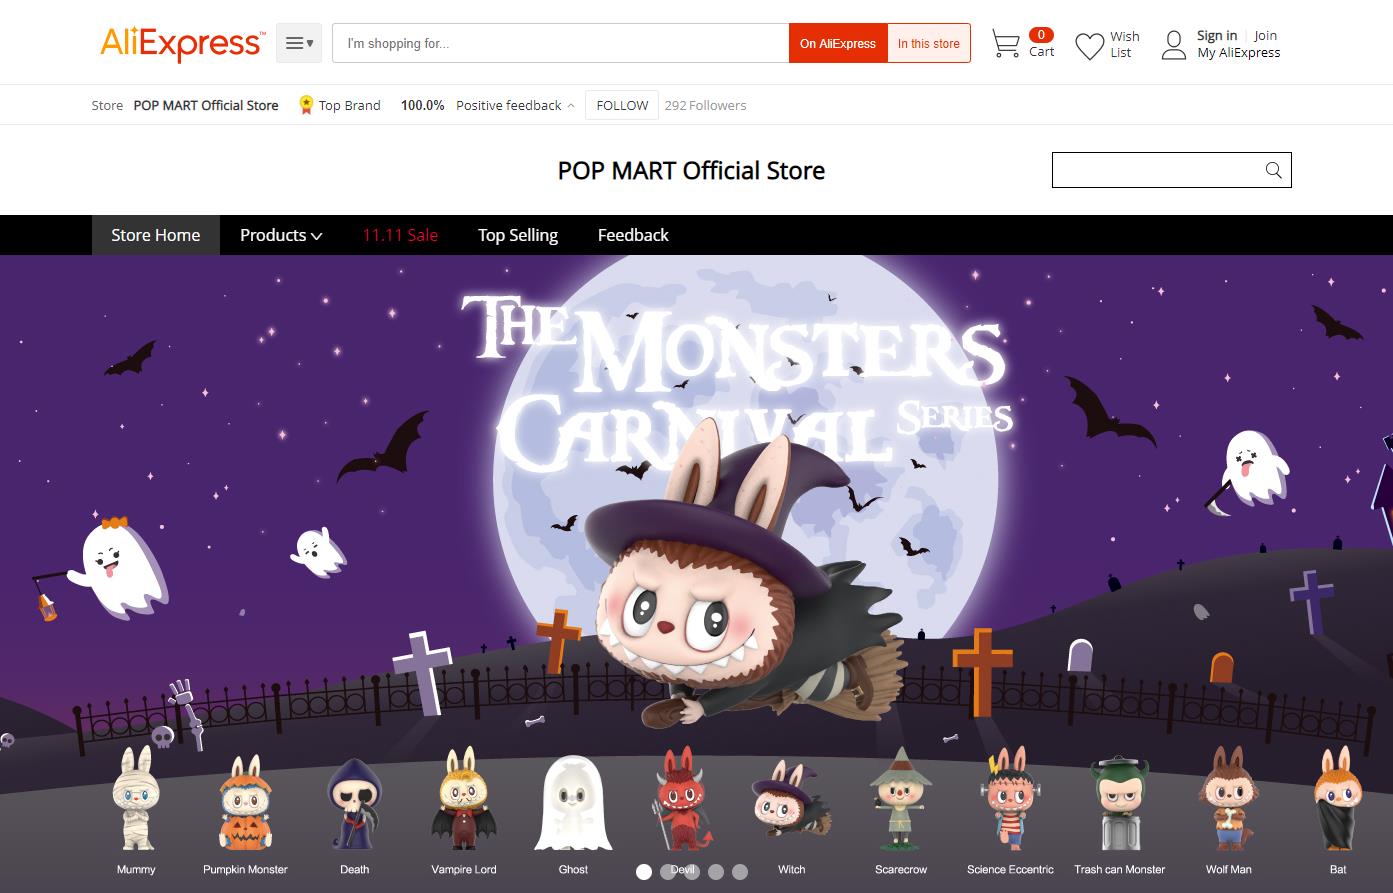 POPMART Launches Global E-Store on AliExpress